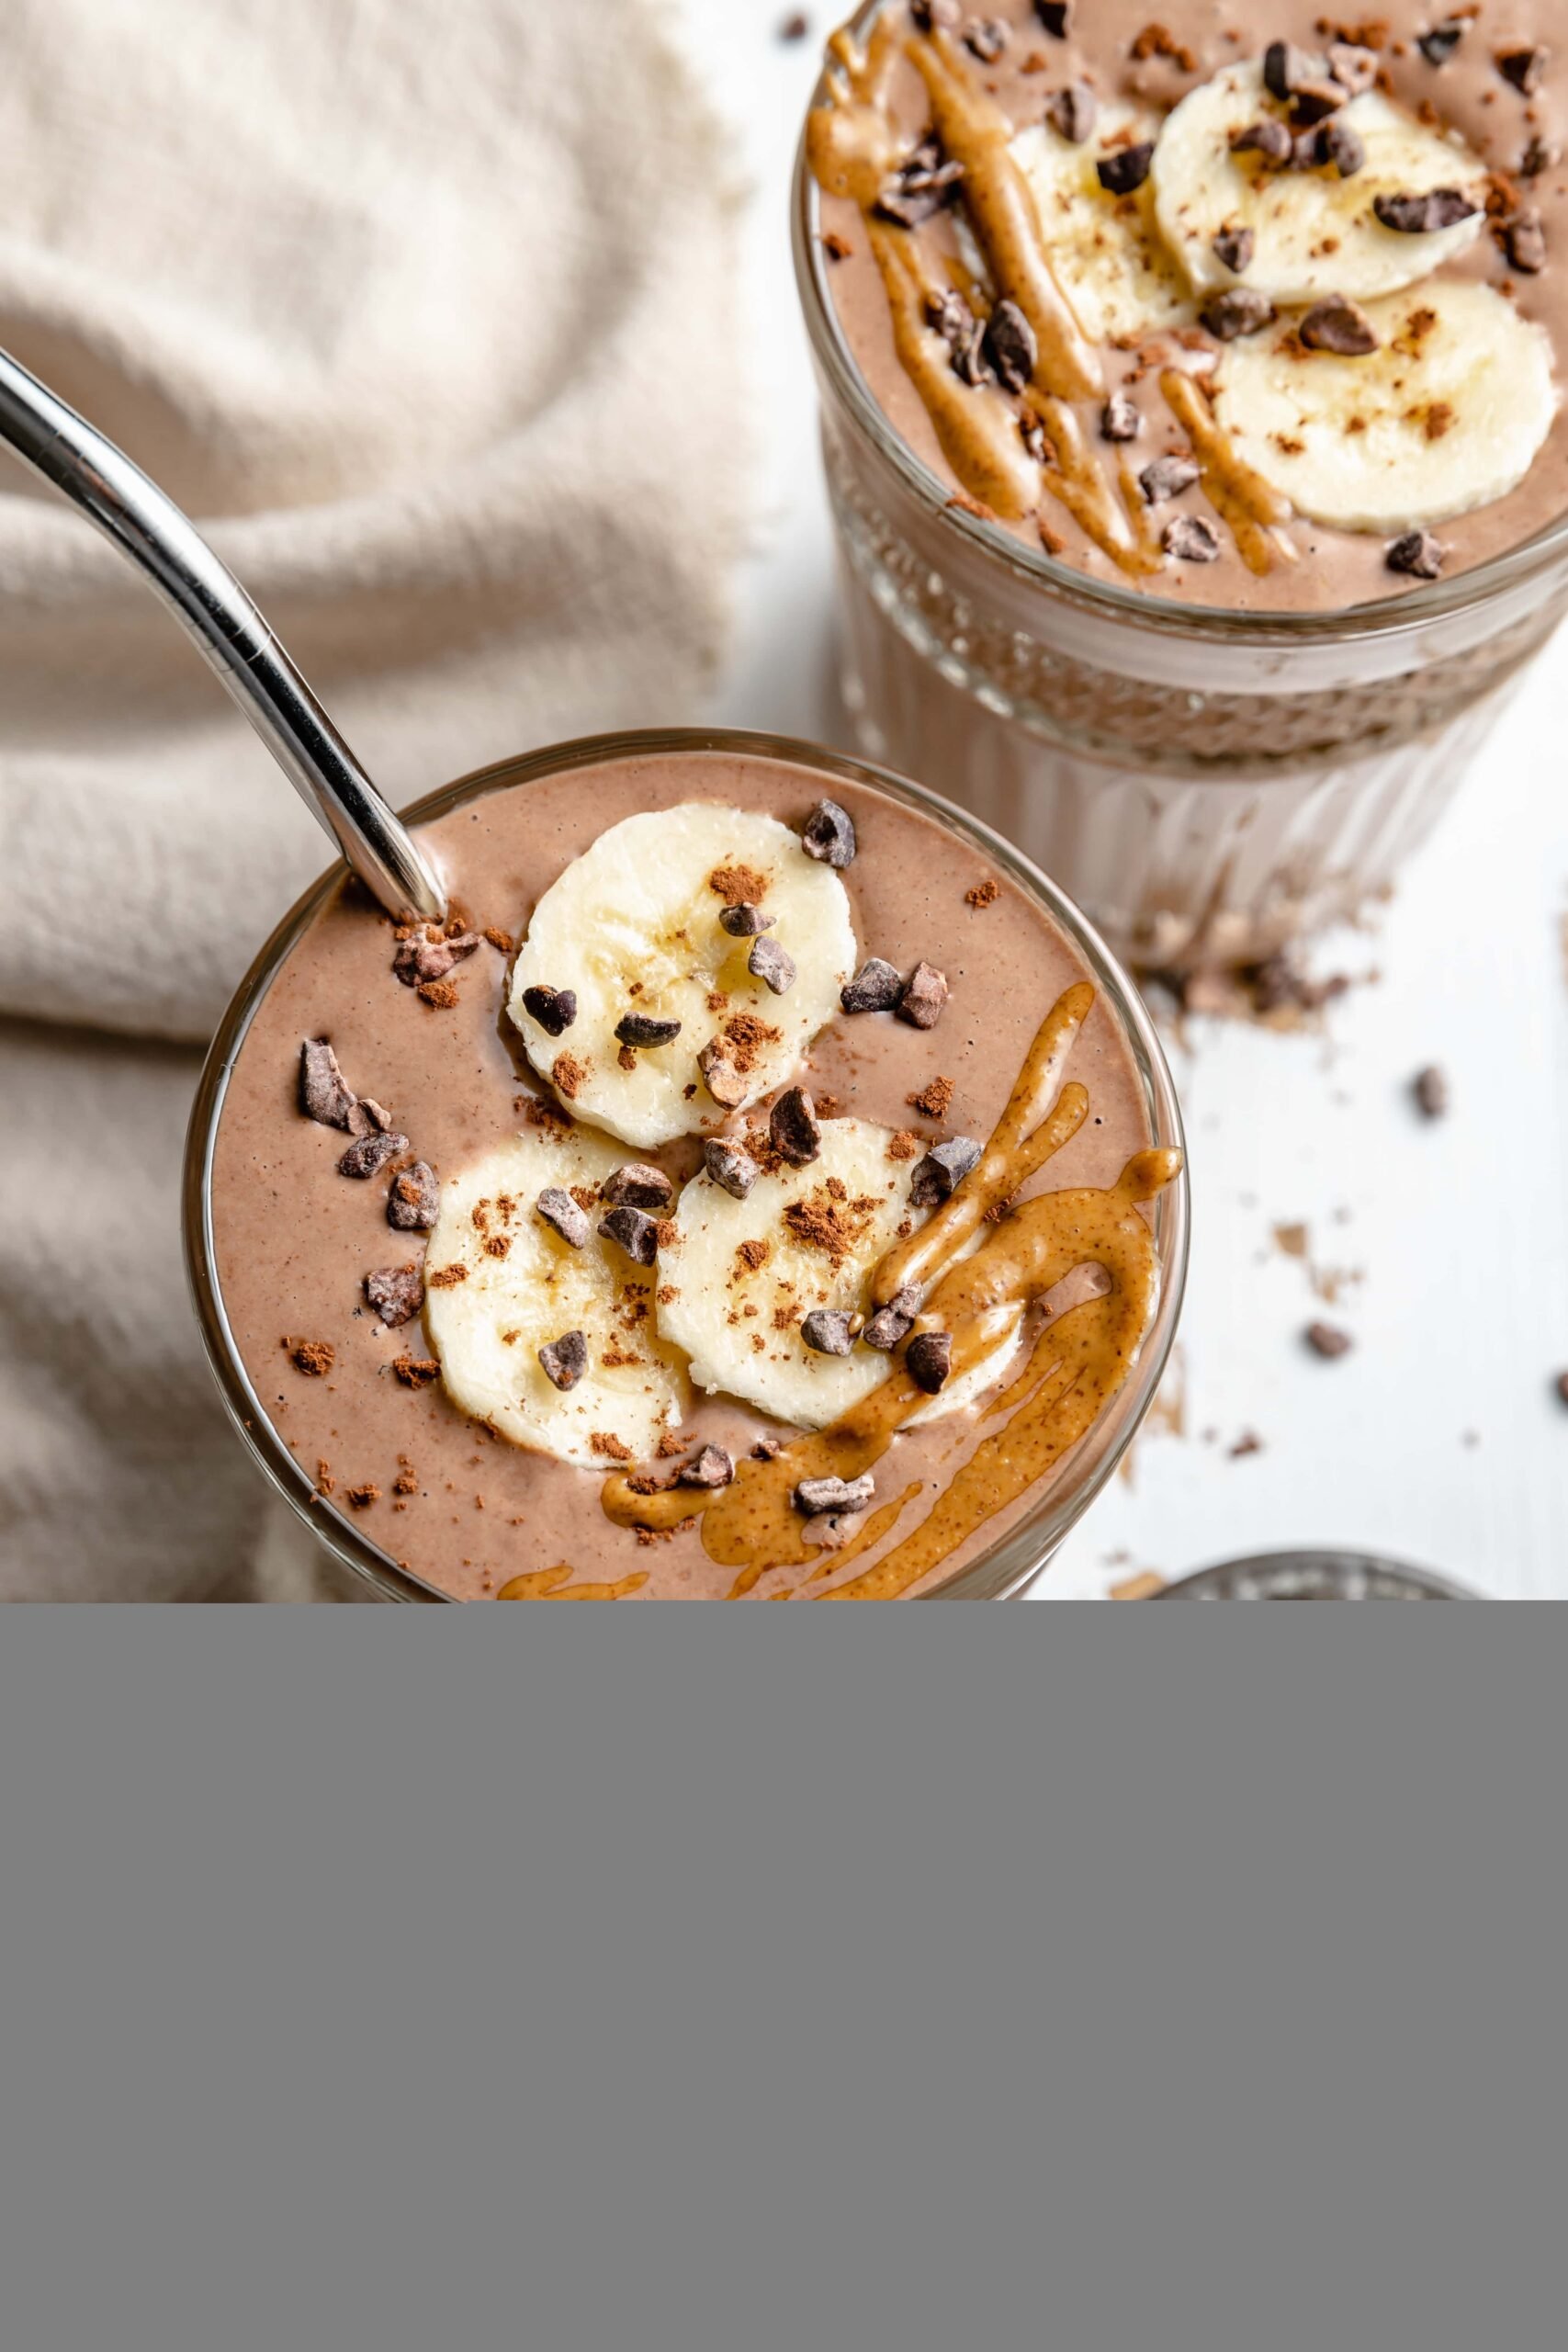 Chocolate Banana Smoothie All The Healthy Things